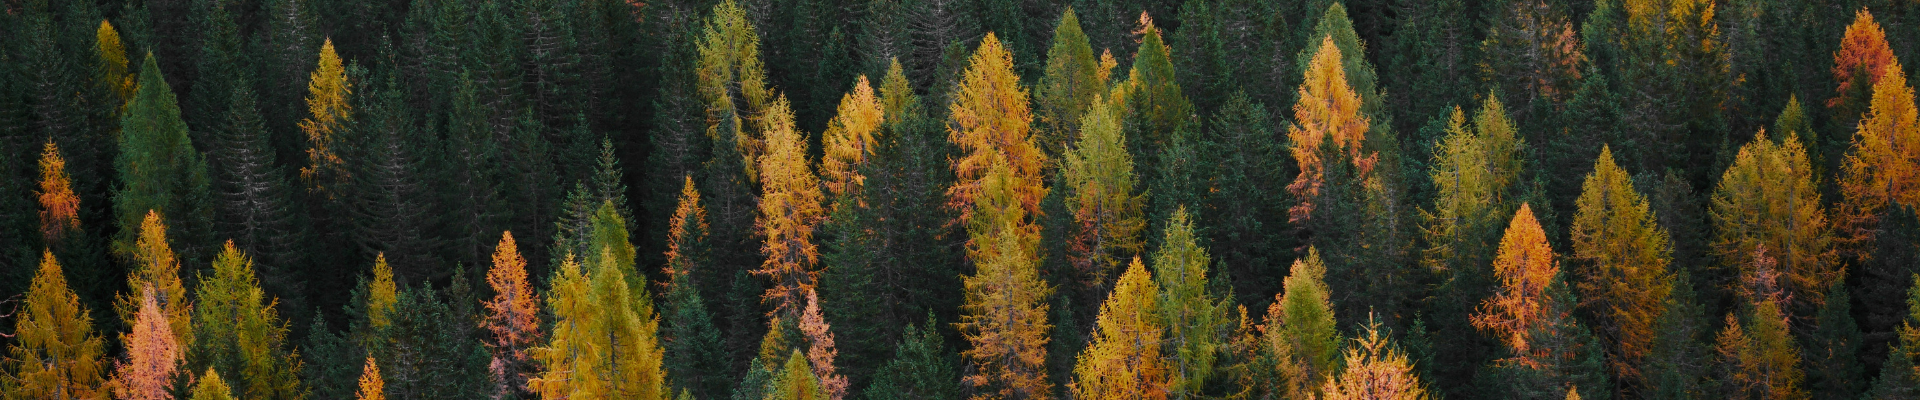 trees-fall-banner_1920x400